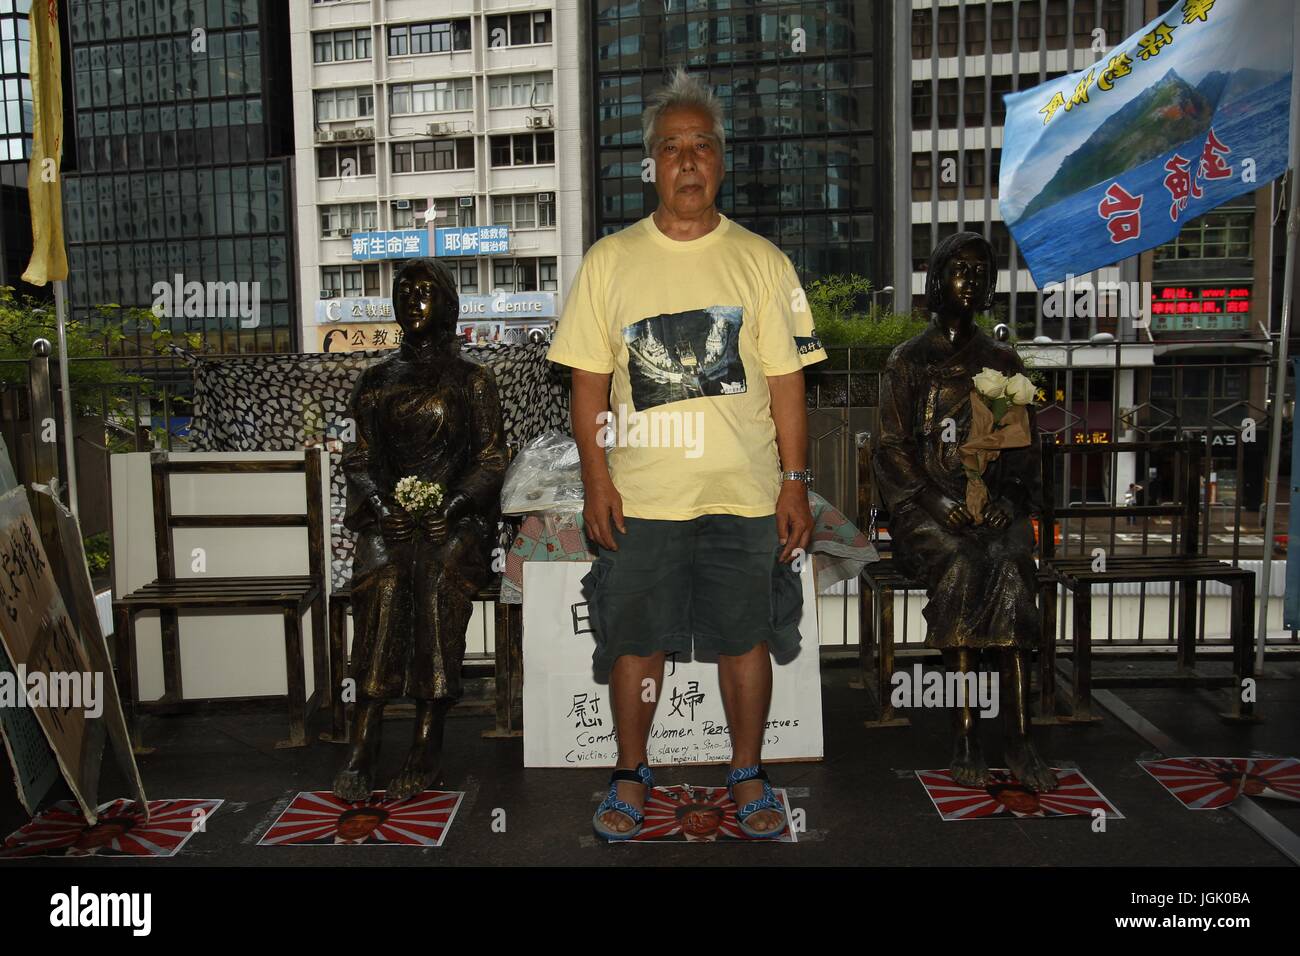 July 8, 2017 - Hong Kong, CHINA - Member of the Patriotic Organization steps on the printed image of present Japanese Prime Minister Shinzo Abe with pair of bronze statue of [Comfort Women] on left ( Chinese woman ) and right ( Korean woman ). To commemorate 80th anniversary of 7-7, 1937 breaking out of 8 years War against Japan, a local Patriotic Organization have set up pair of bronze statue of Chinese & Korean [Comfort Women] on the flyover adjacent to Consulate General of Japan in Hong Kong. Consulate General is requesting bronze statues to be removed but no actions have been taken so far. Stock Photo